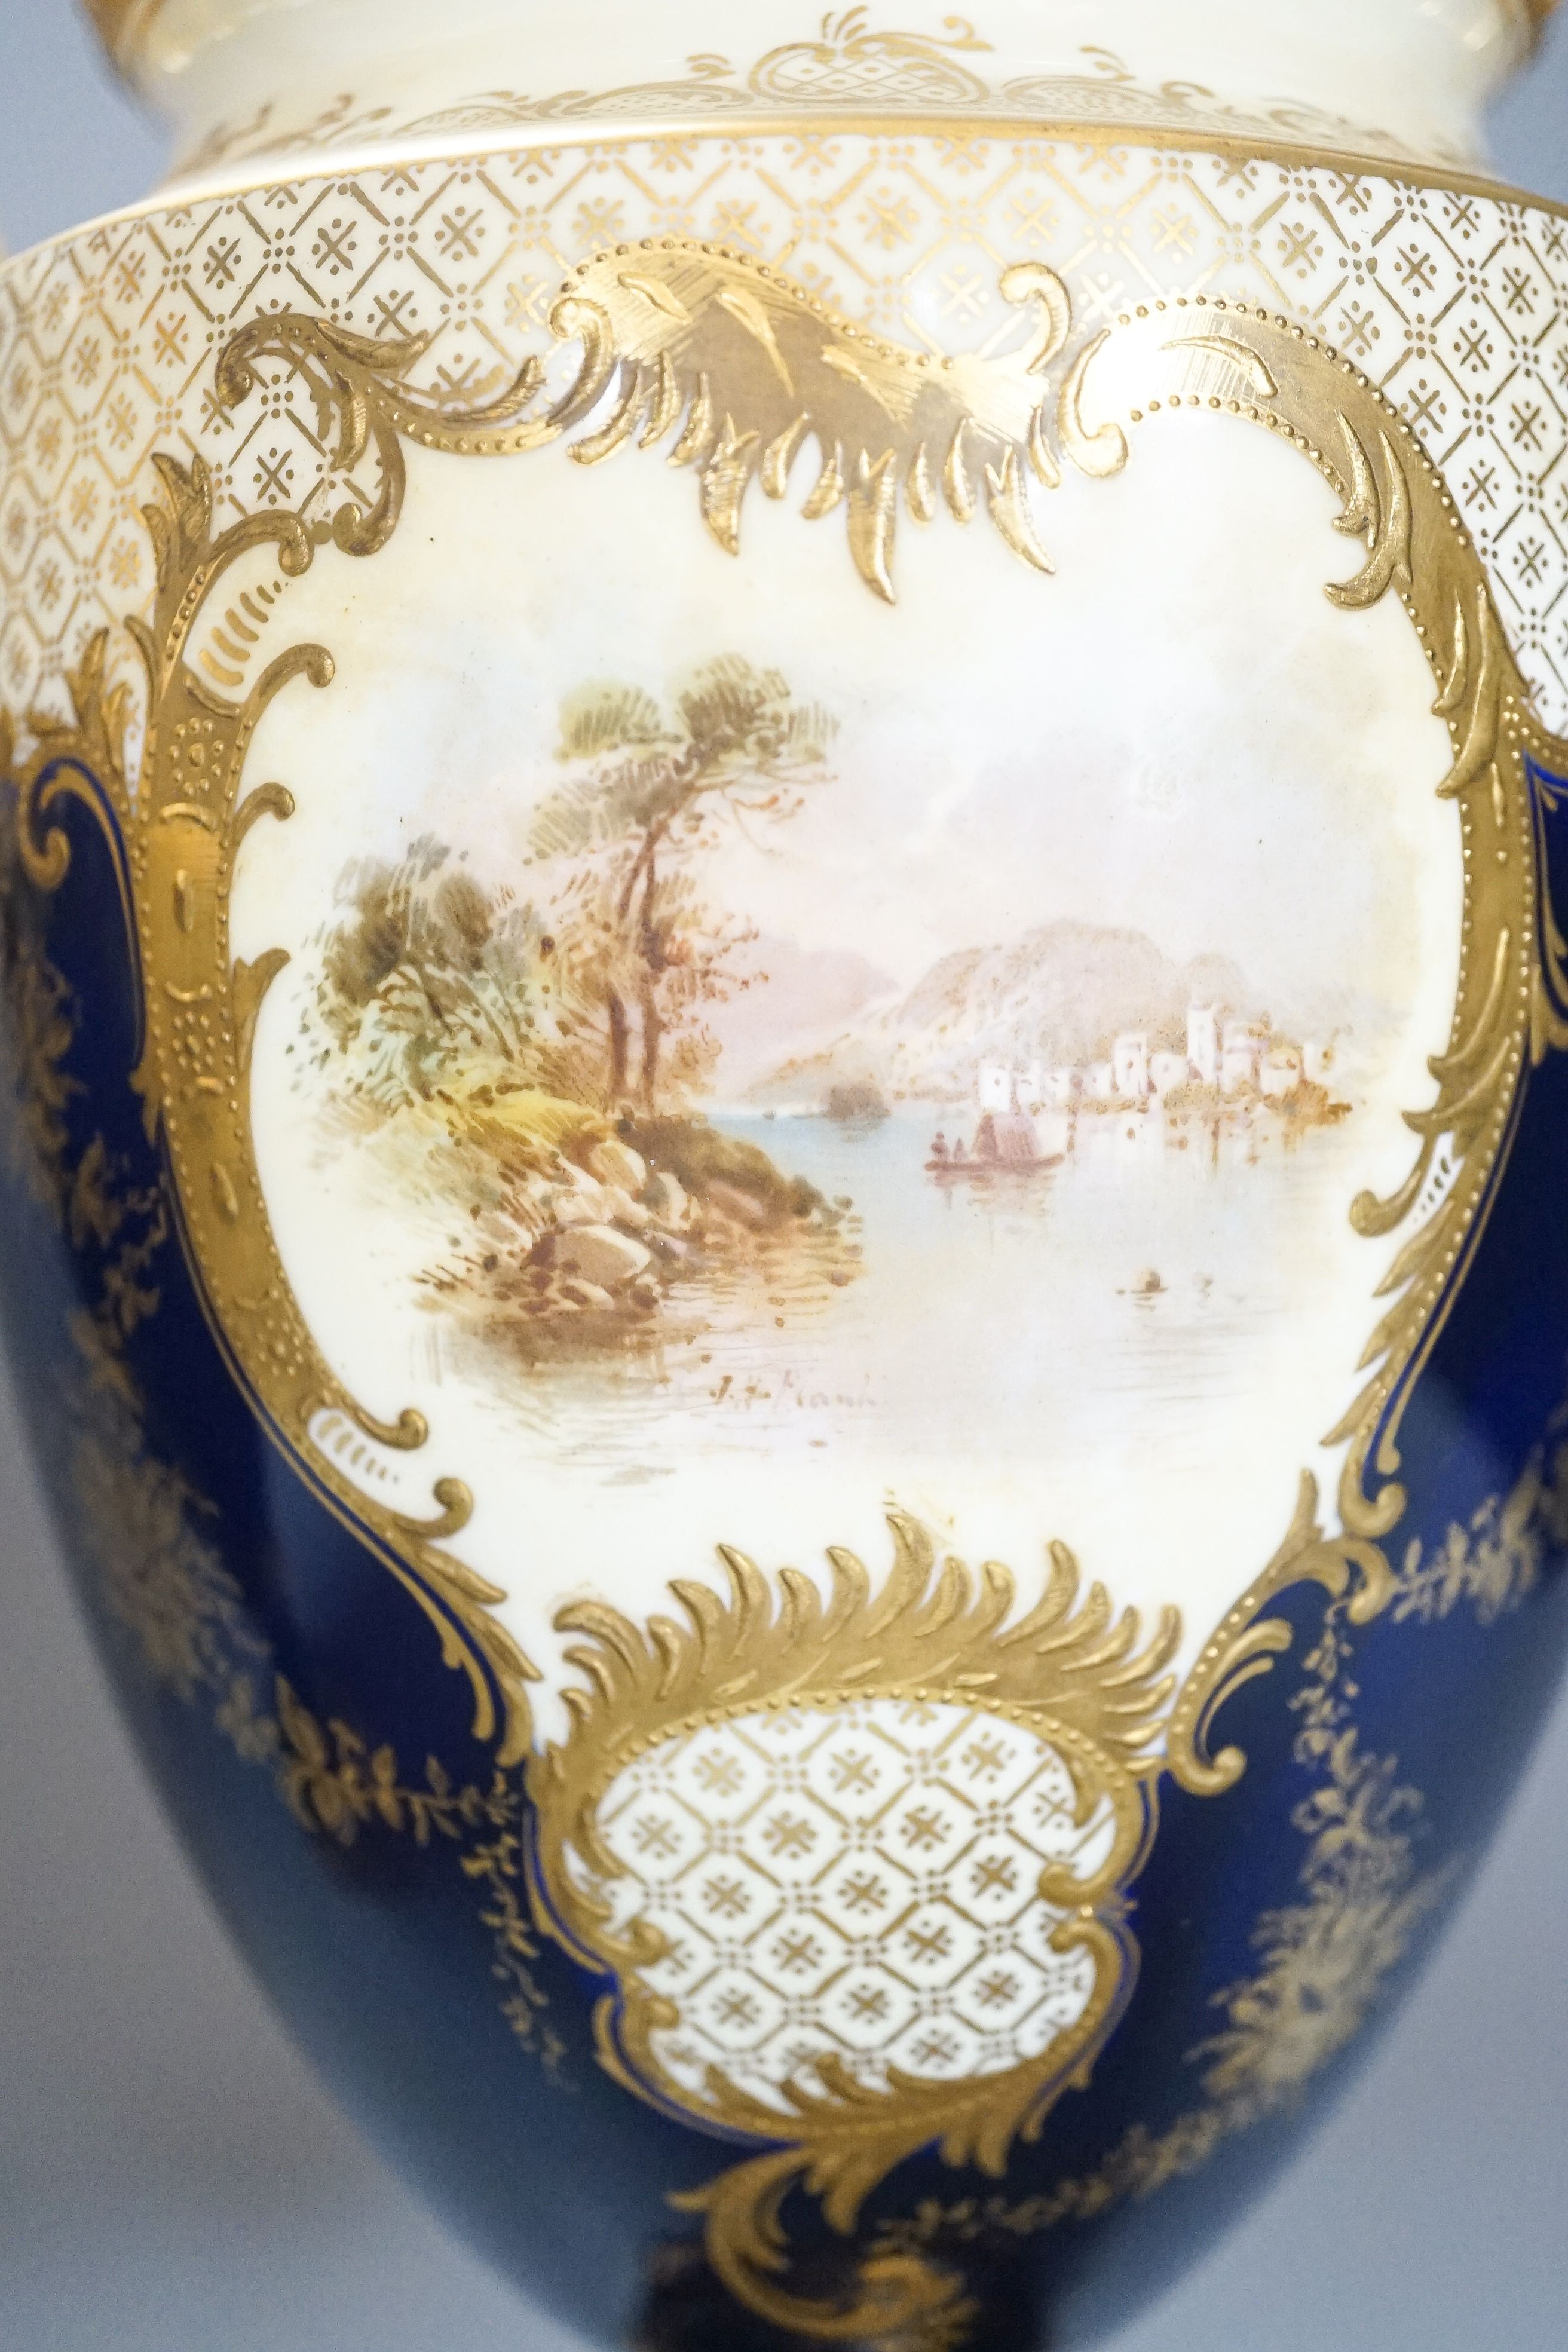 A pair of large Coalport landscape painted vases and covers, c.1900, 30cm